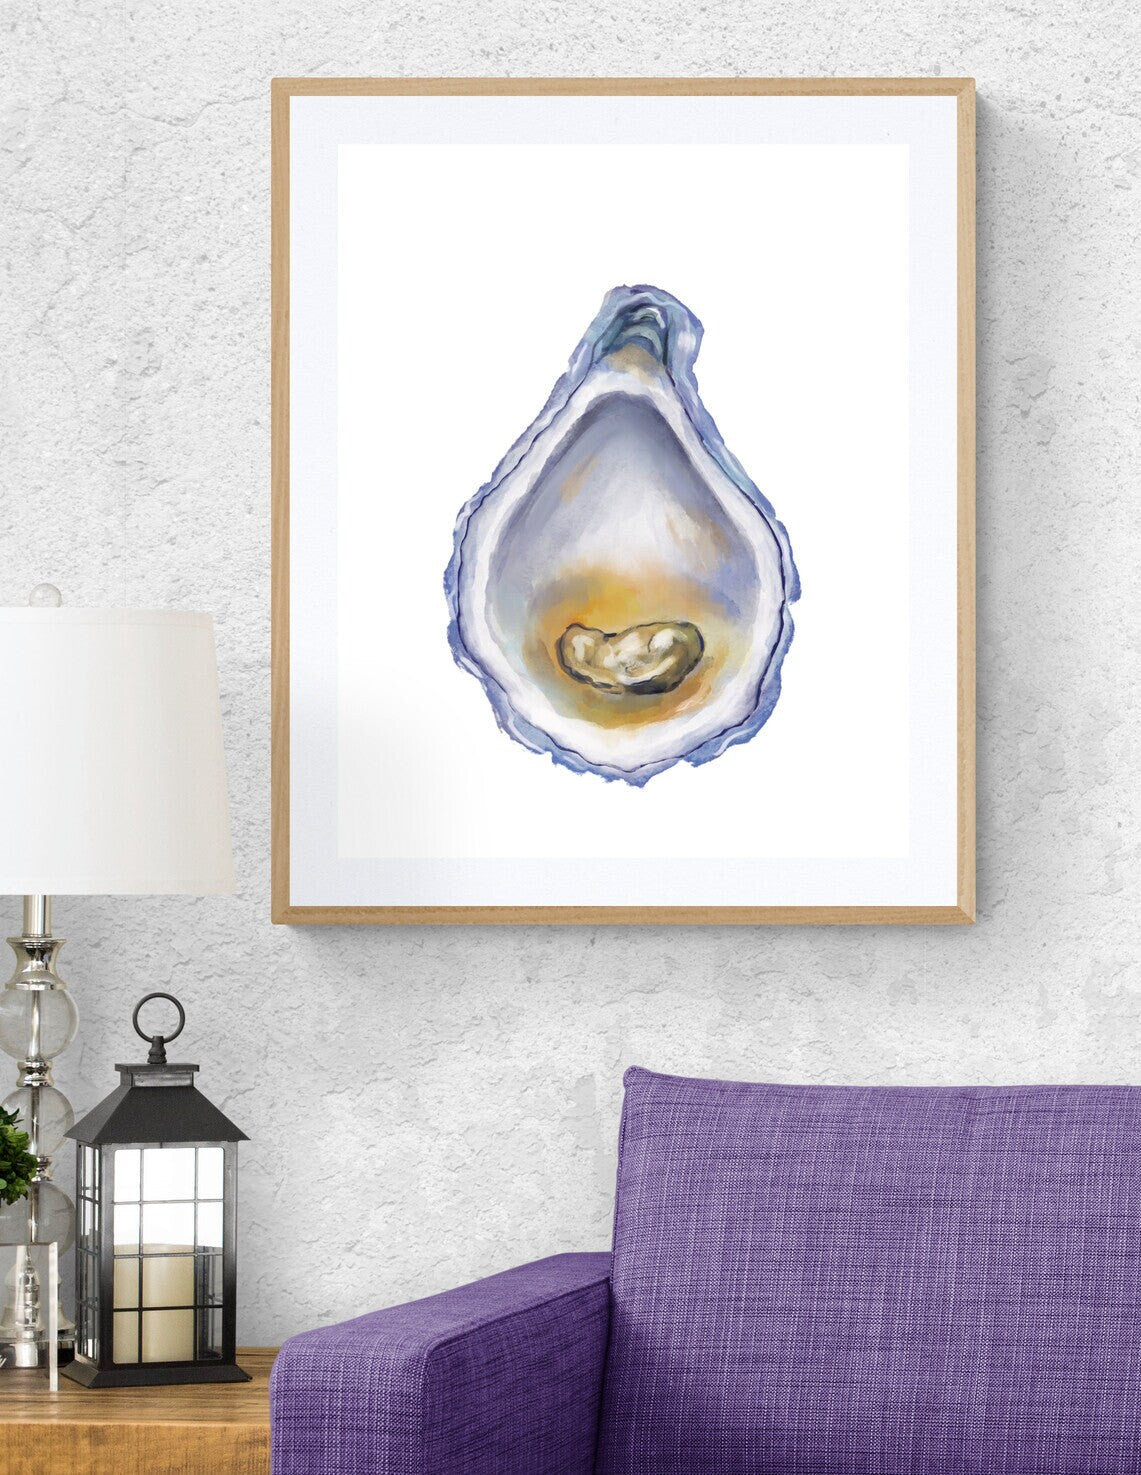 Oyster Print, Oyster Painting, Beach House Decor, Shell Print, Oyster Shell Wall Art, Coastal Decor, Living Room Wall Art no2